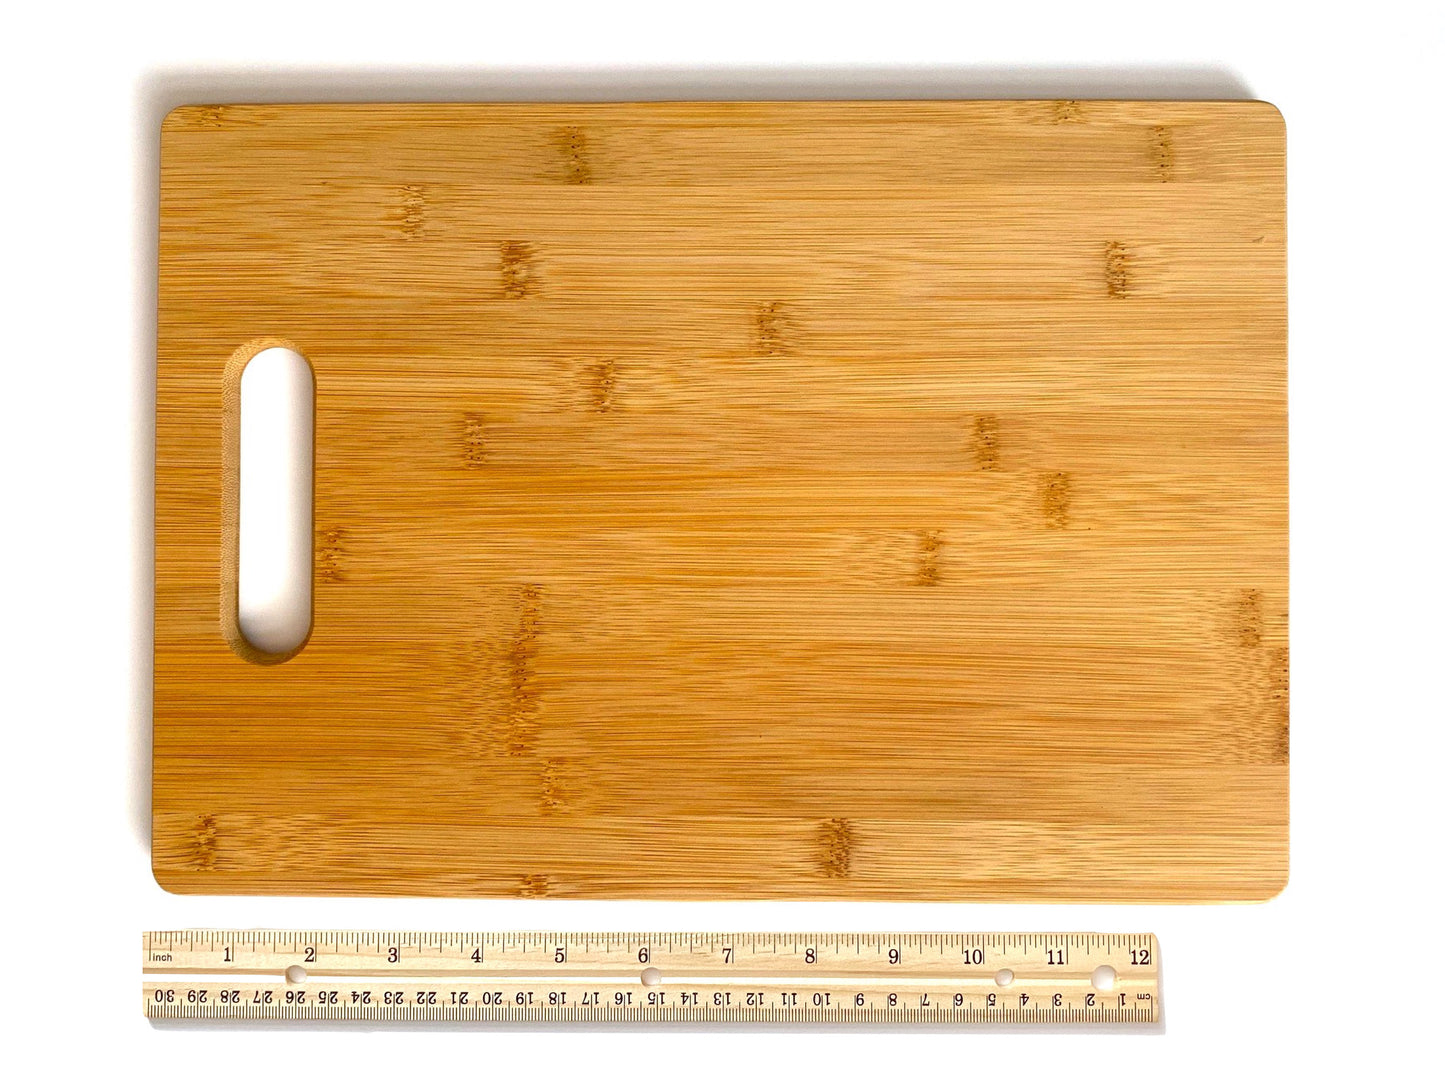 Personalized Rectangle Cutting Board